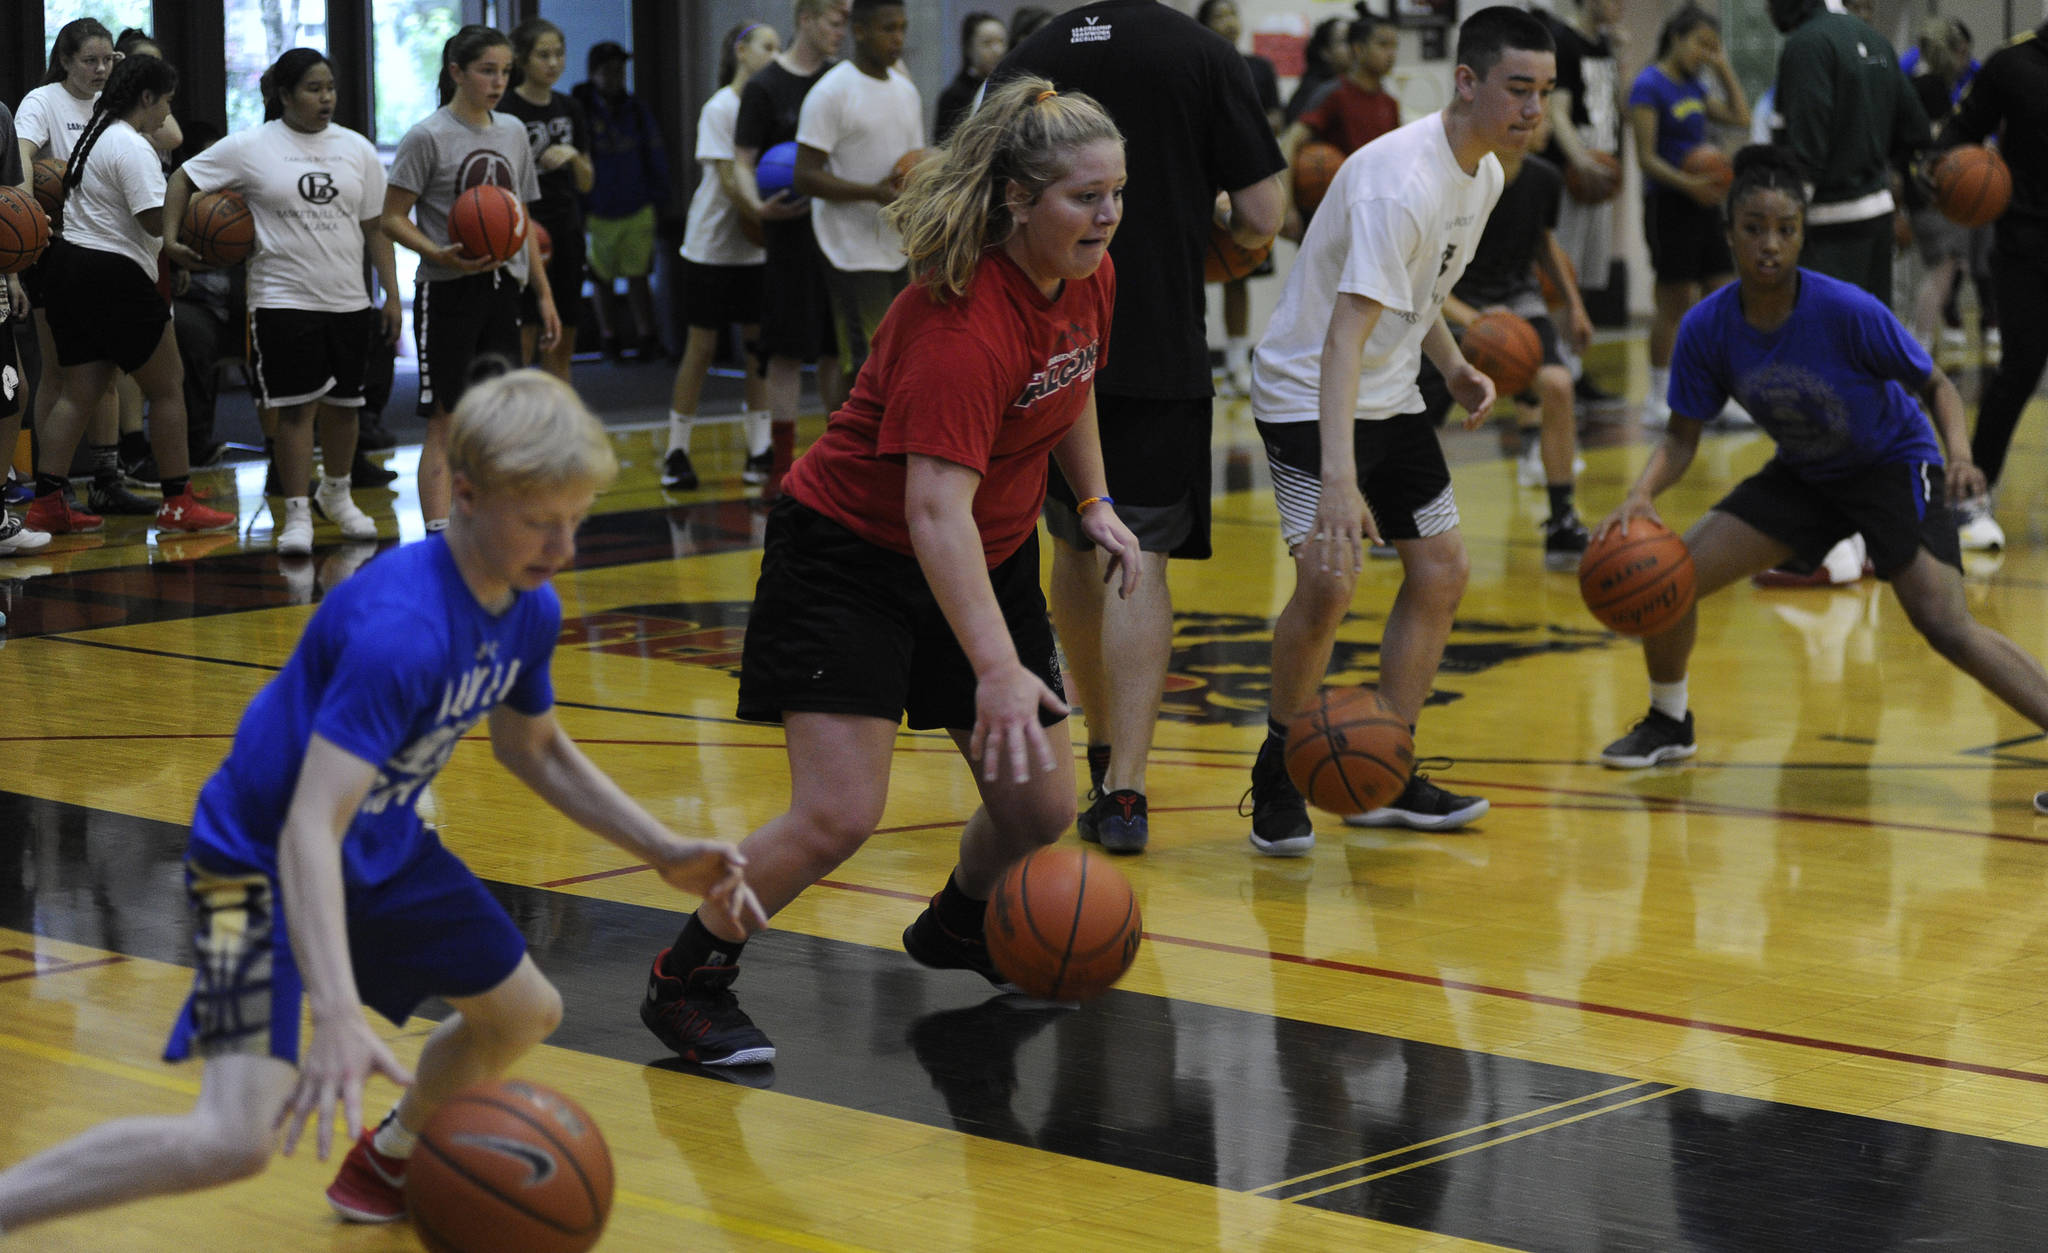 ‘Always give back’: Boozer returns for second annual b-ball clinic